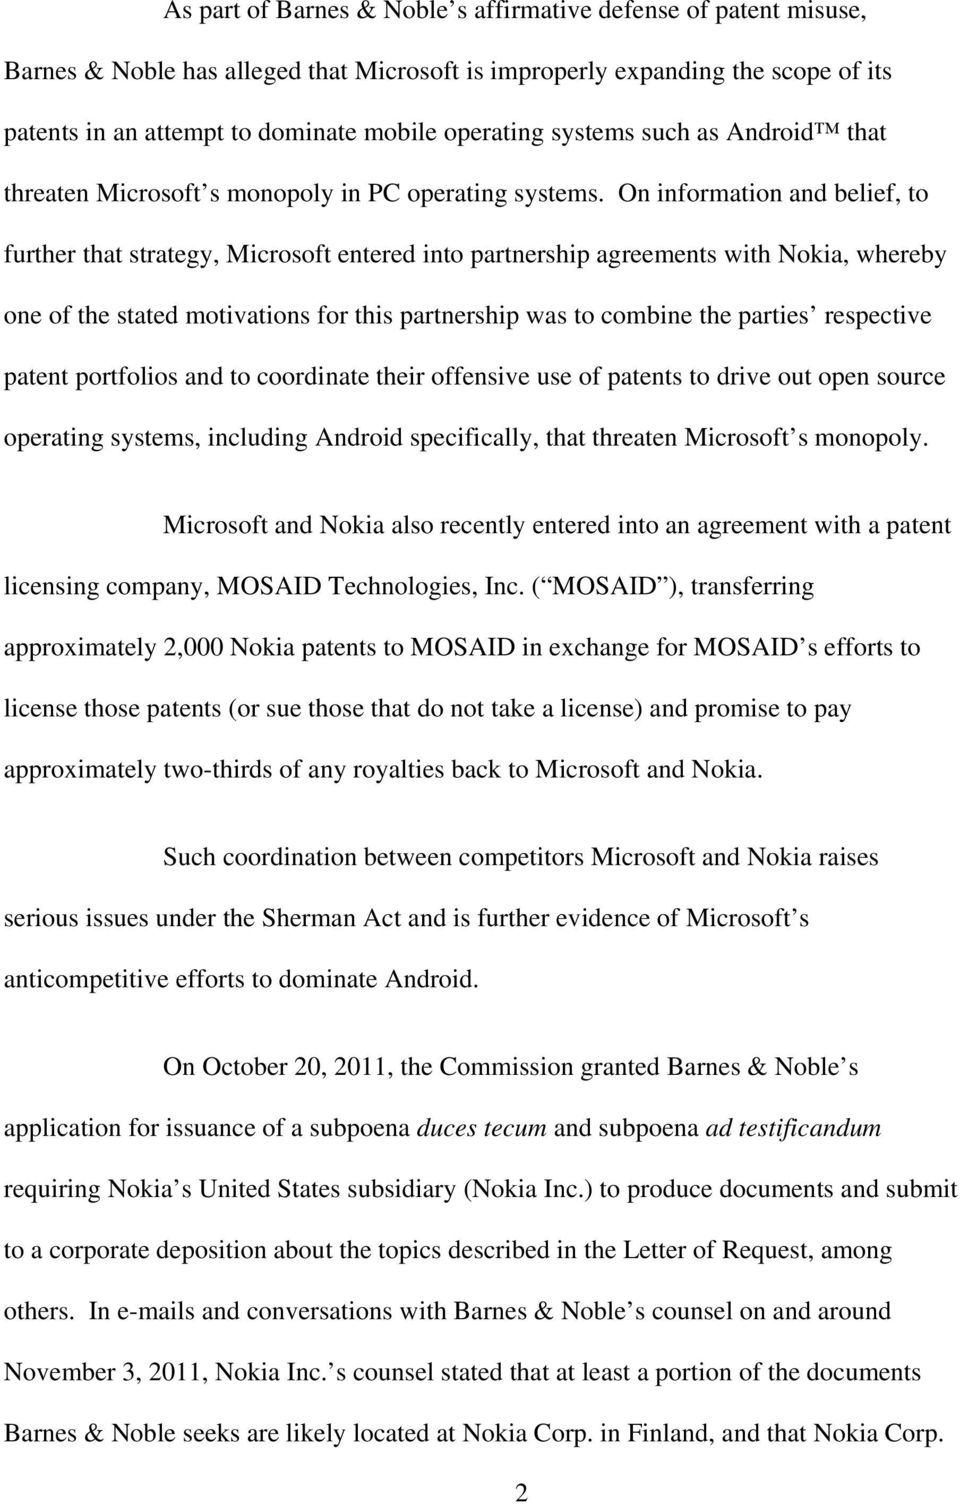 On information and belief, to further that strategy, Microsoft entered into partnership agreements with Nokia, whereby one of the stated motivations for this partnership was to combine the parties